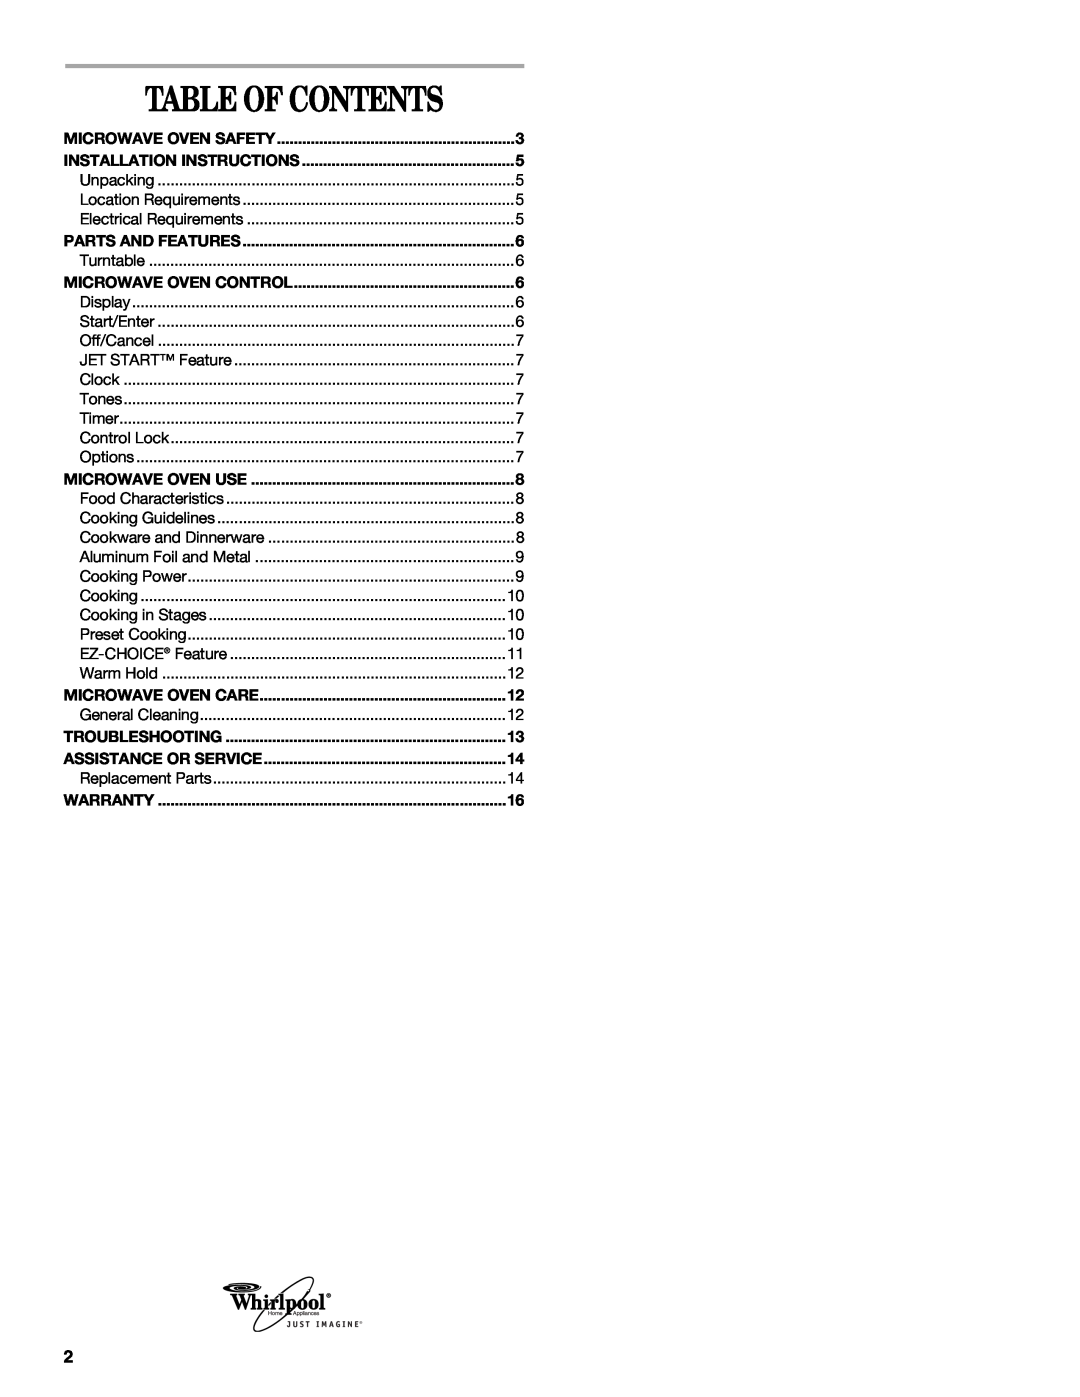 Whirlpool MT1120SL manual Table Of Contents 